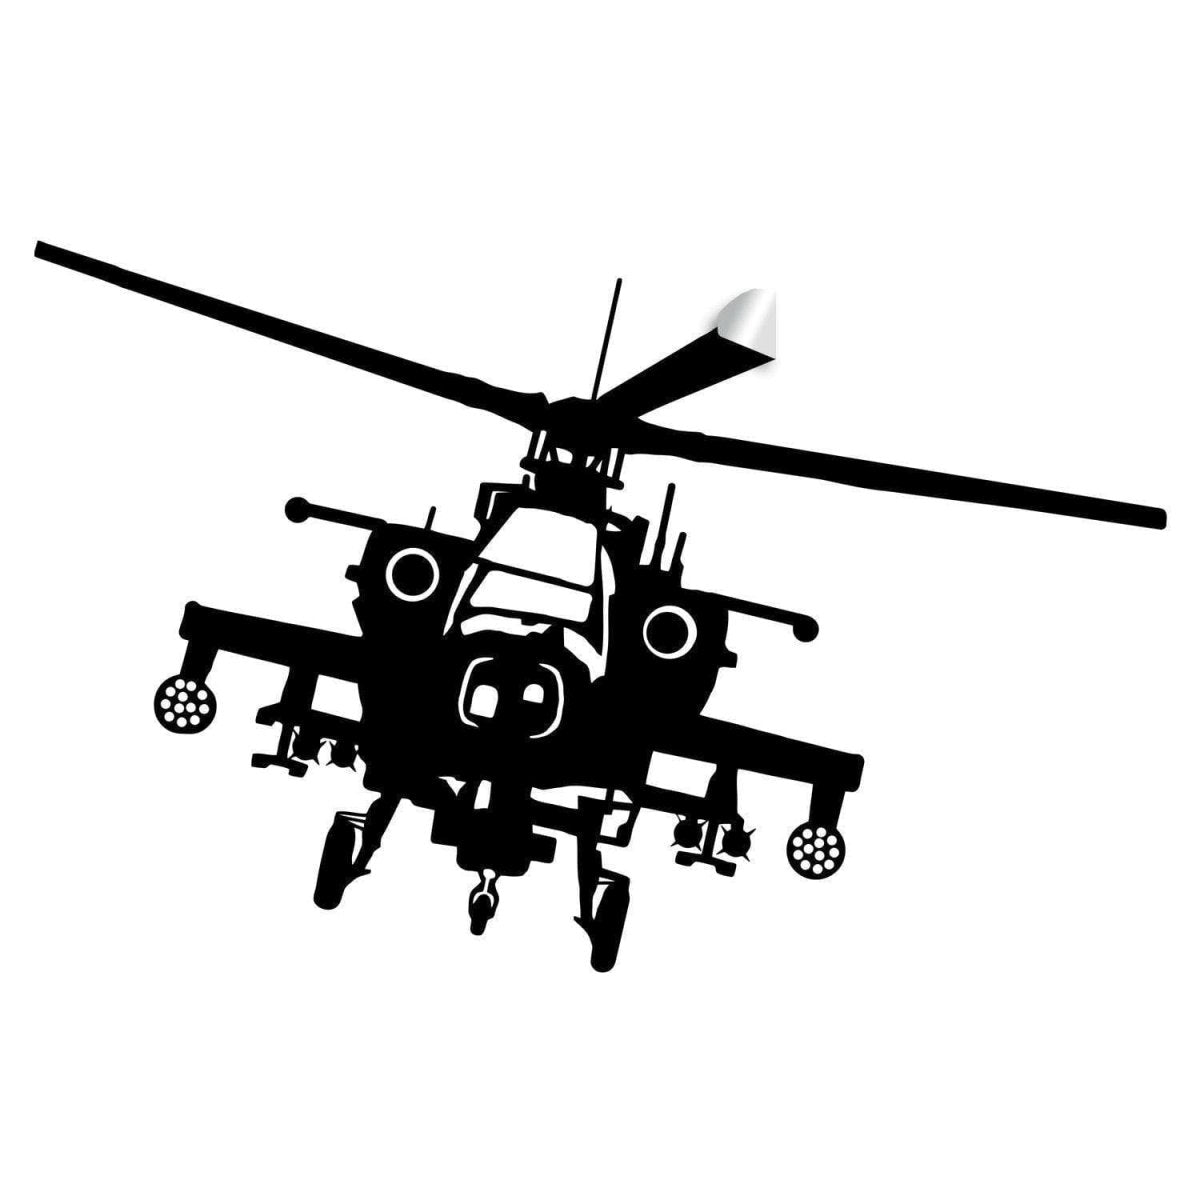 Aviator's Dream Helicopter Wall Sticker - Decords